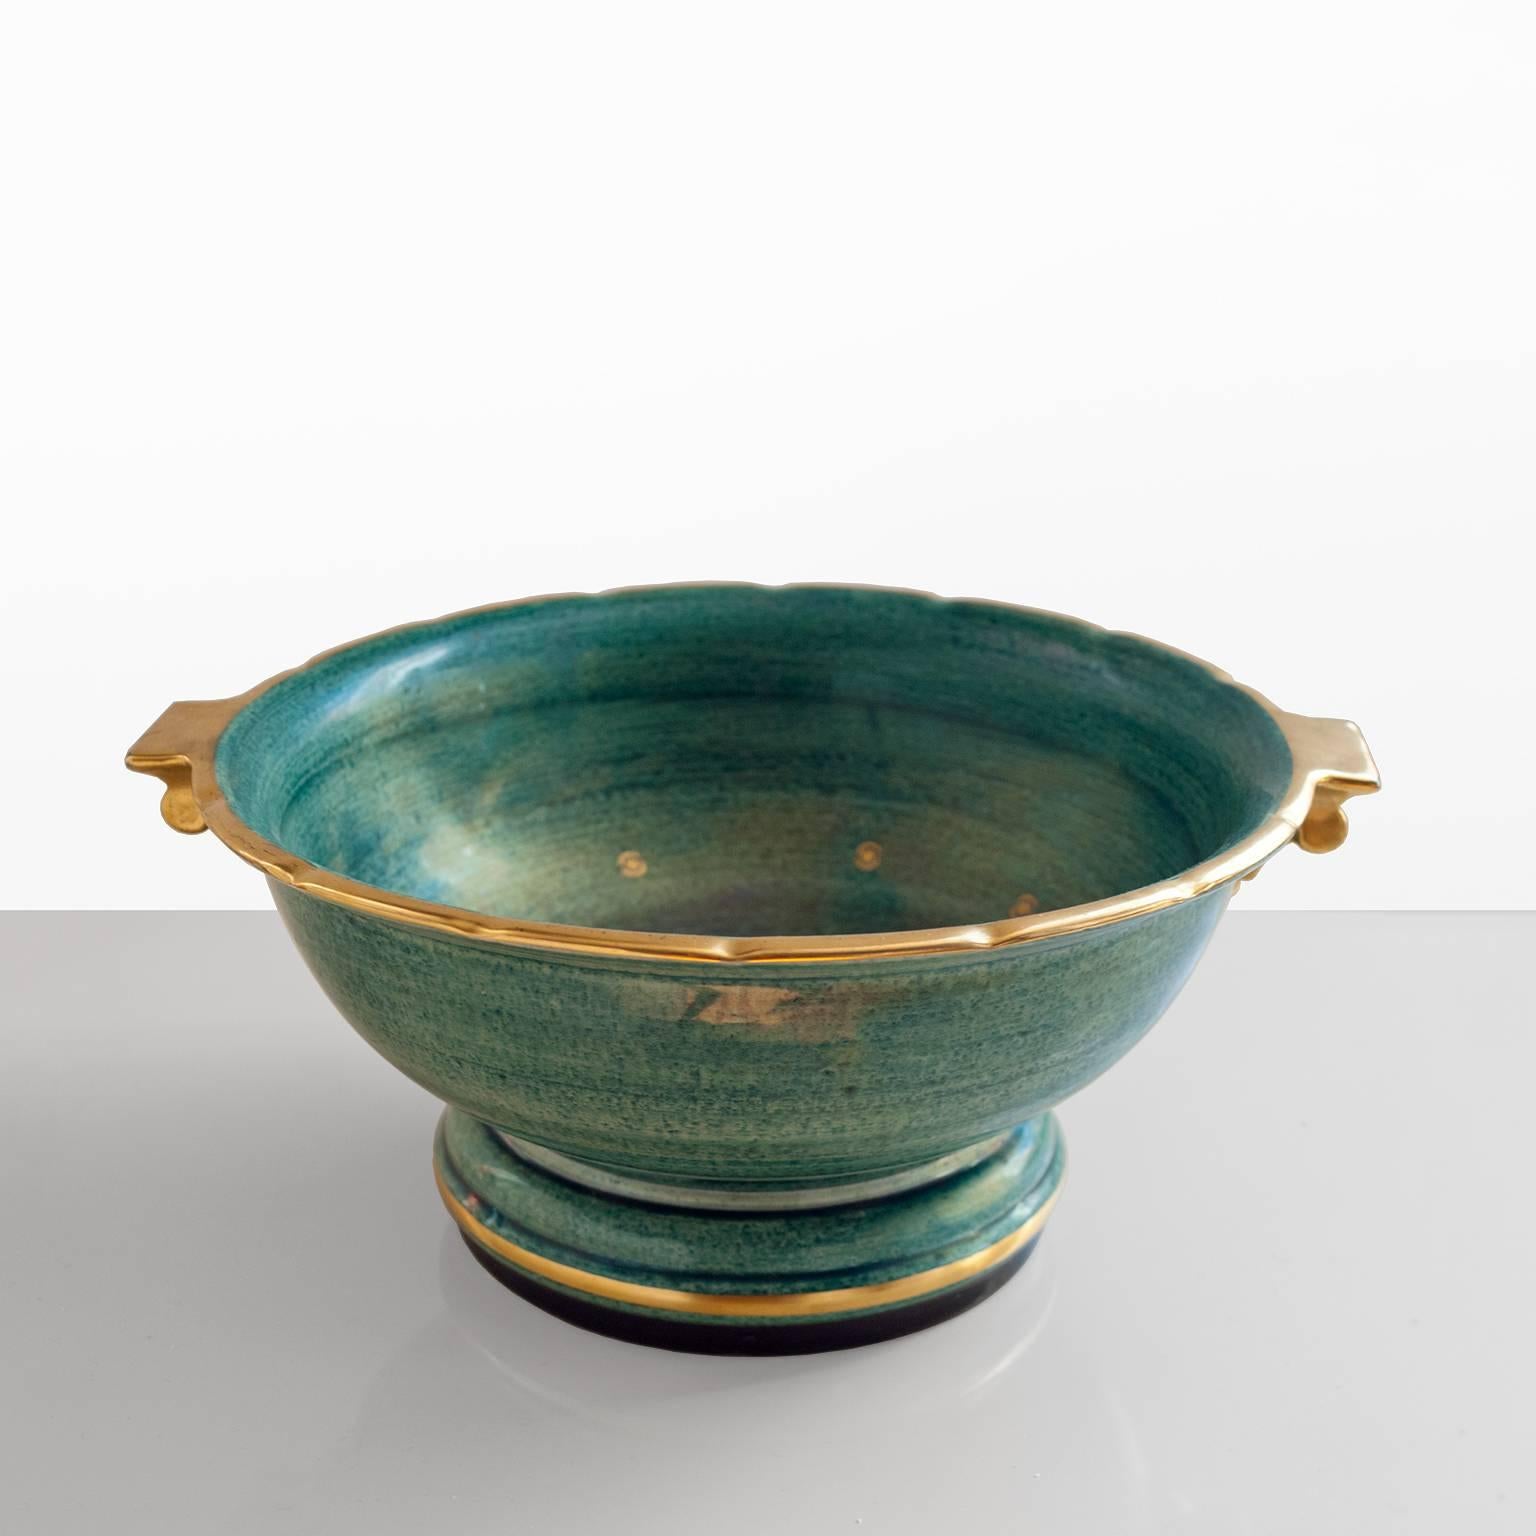 Scandinavian Modern ceramic footed bowl by Josef Ekberg in luster glaze with hand decorated details in gold. Made at Gustavsberg, signed and dated.

Measures: Diameter 11.5" x height 5".